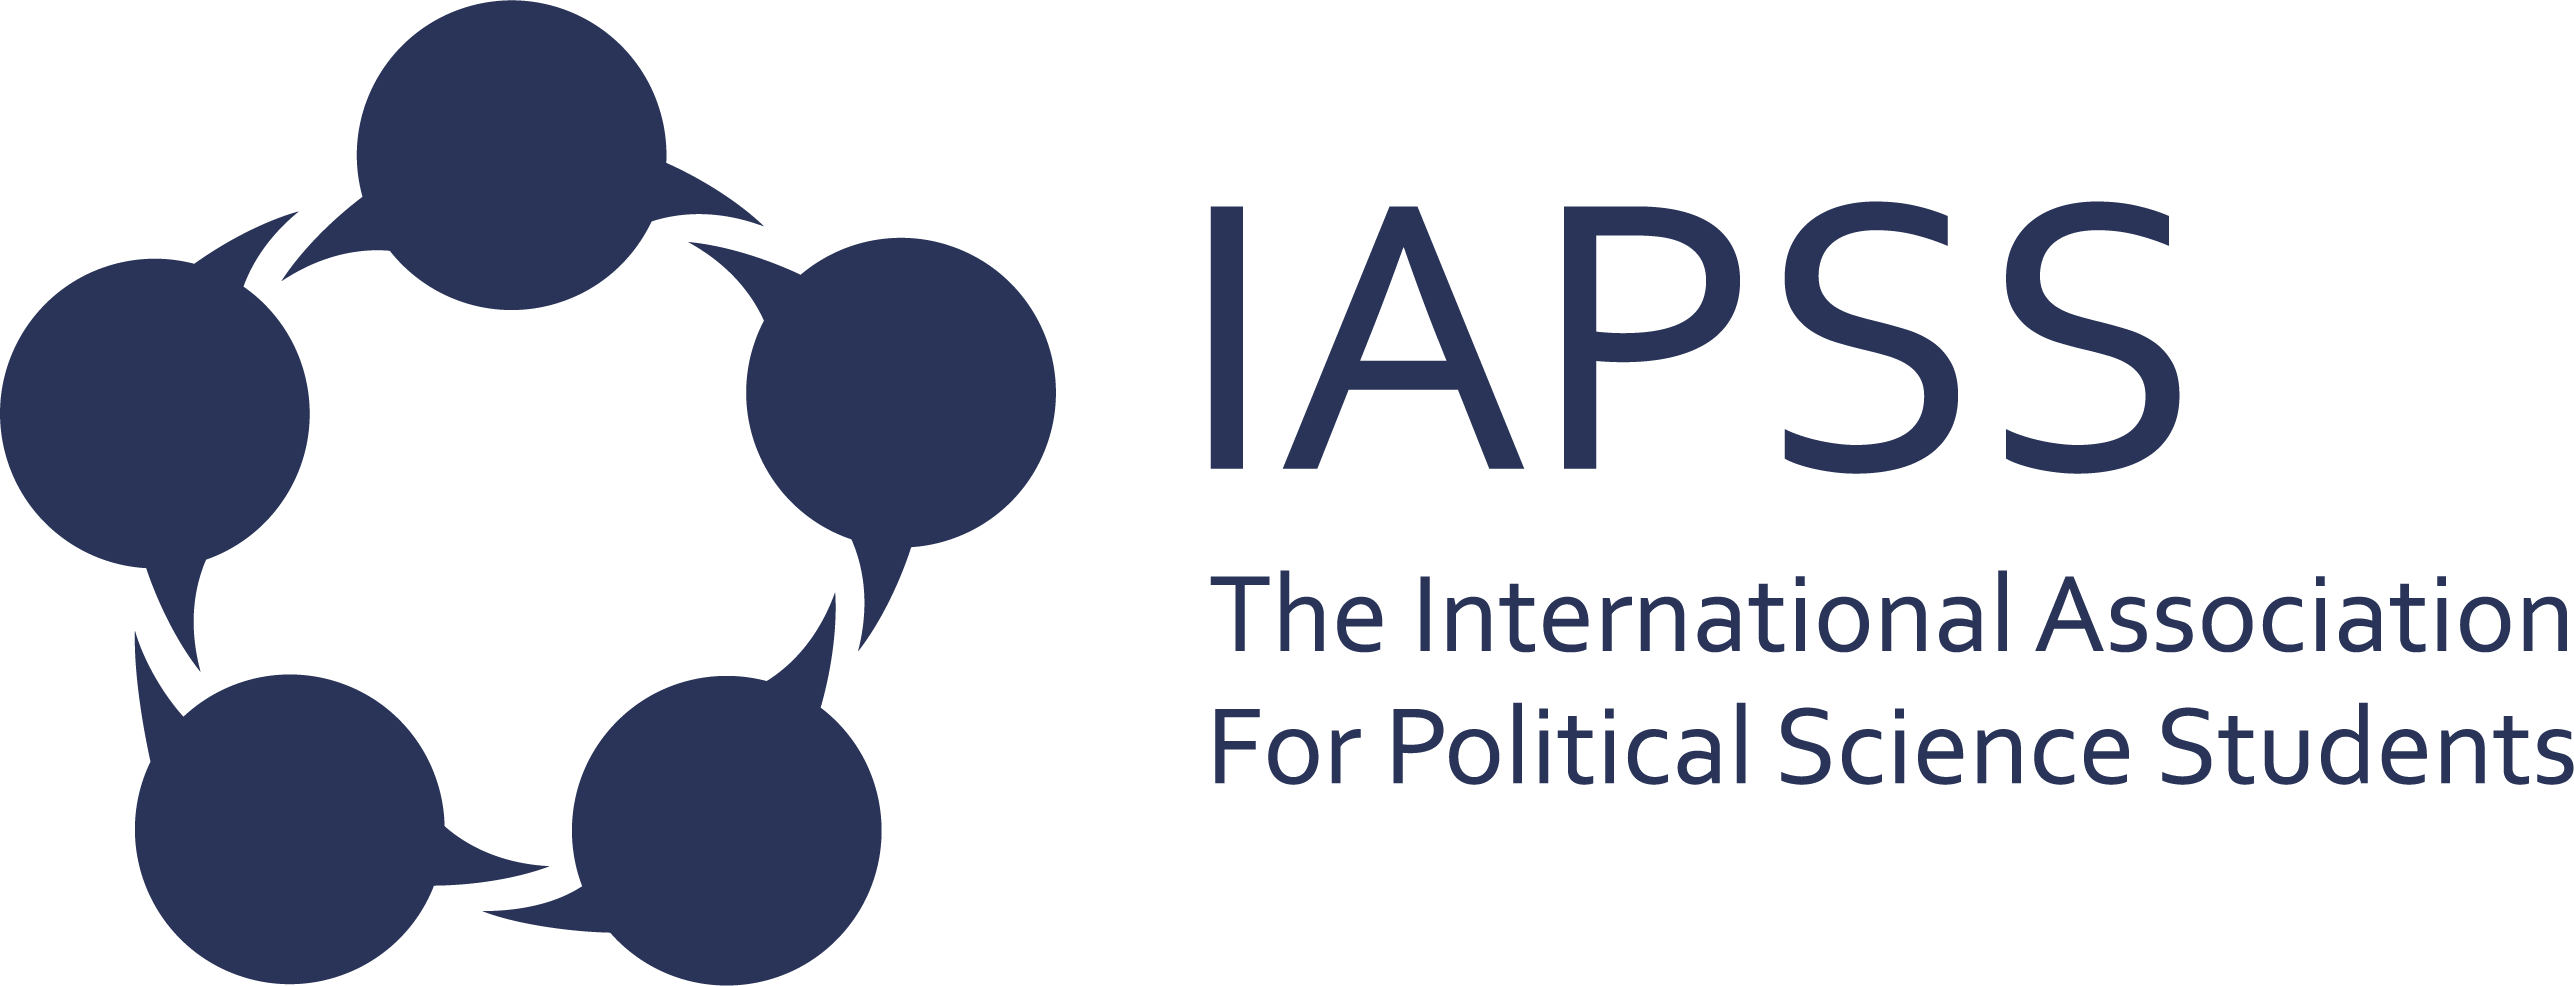 International Association for Political Science Students